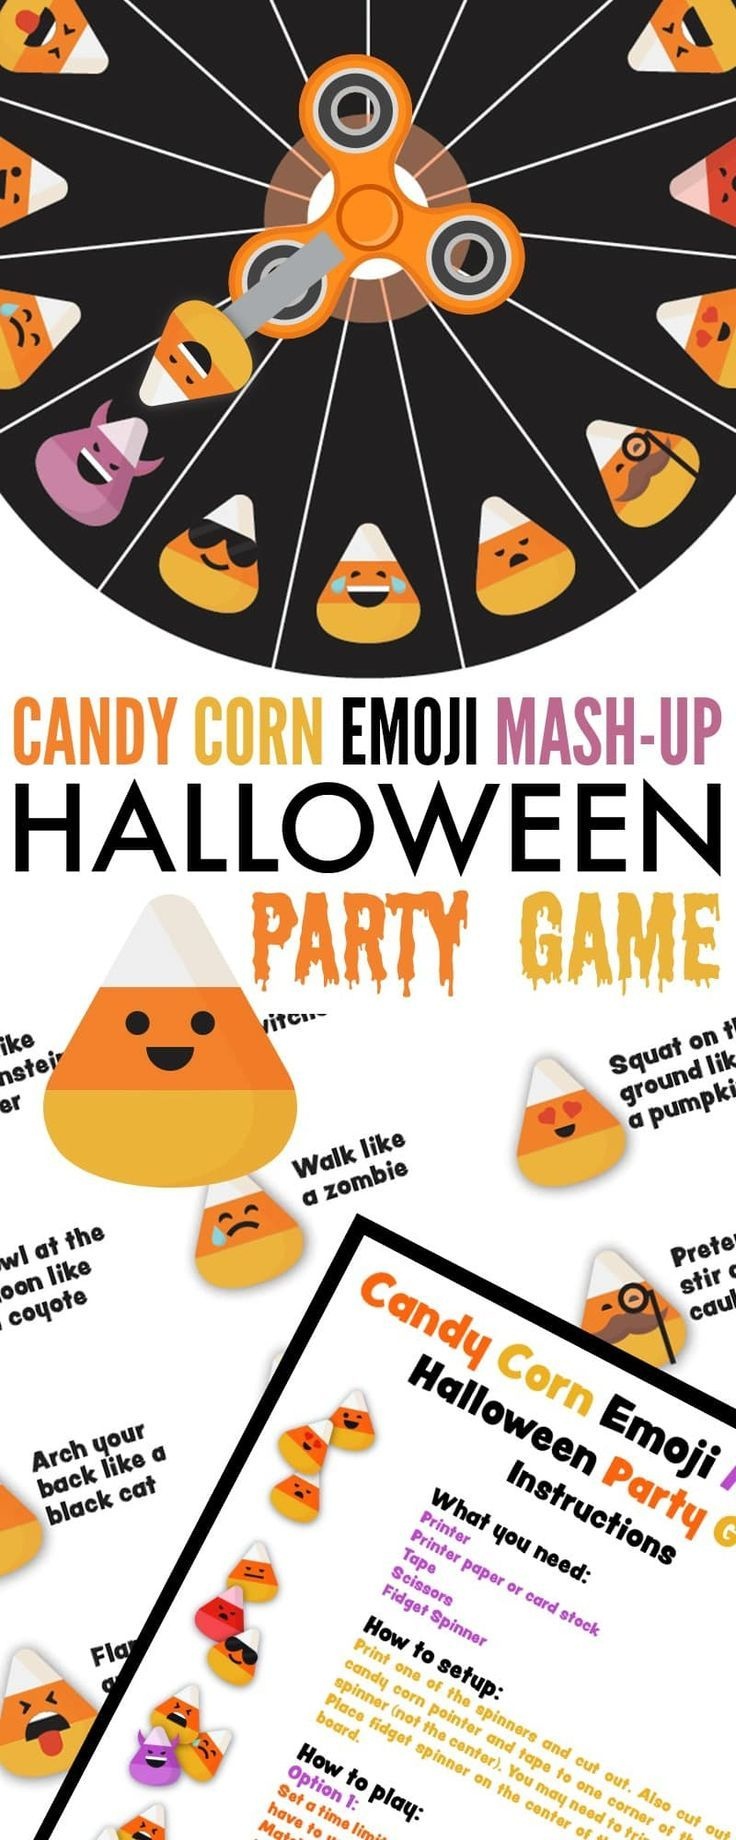 Candy Corn Emoji Mash-Up Halloween Party Game | Activities For Boys - Free Printable Halloween Party Games